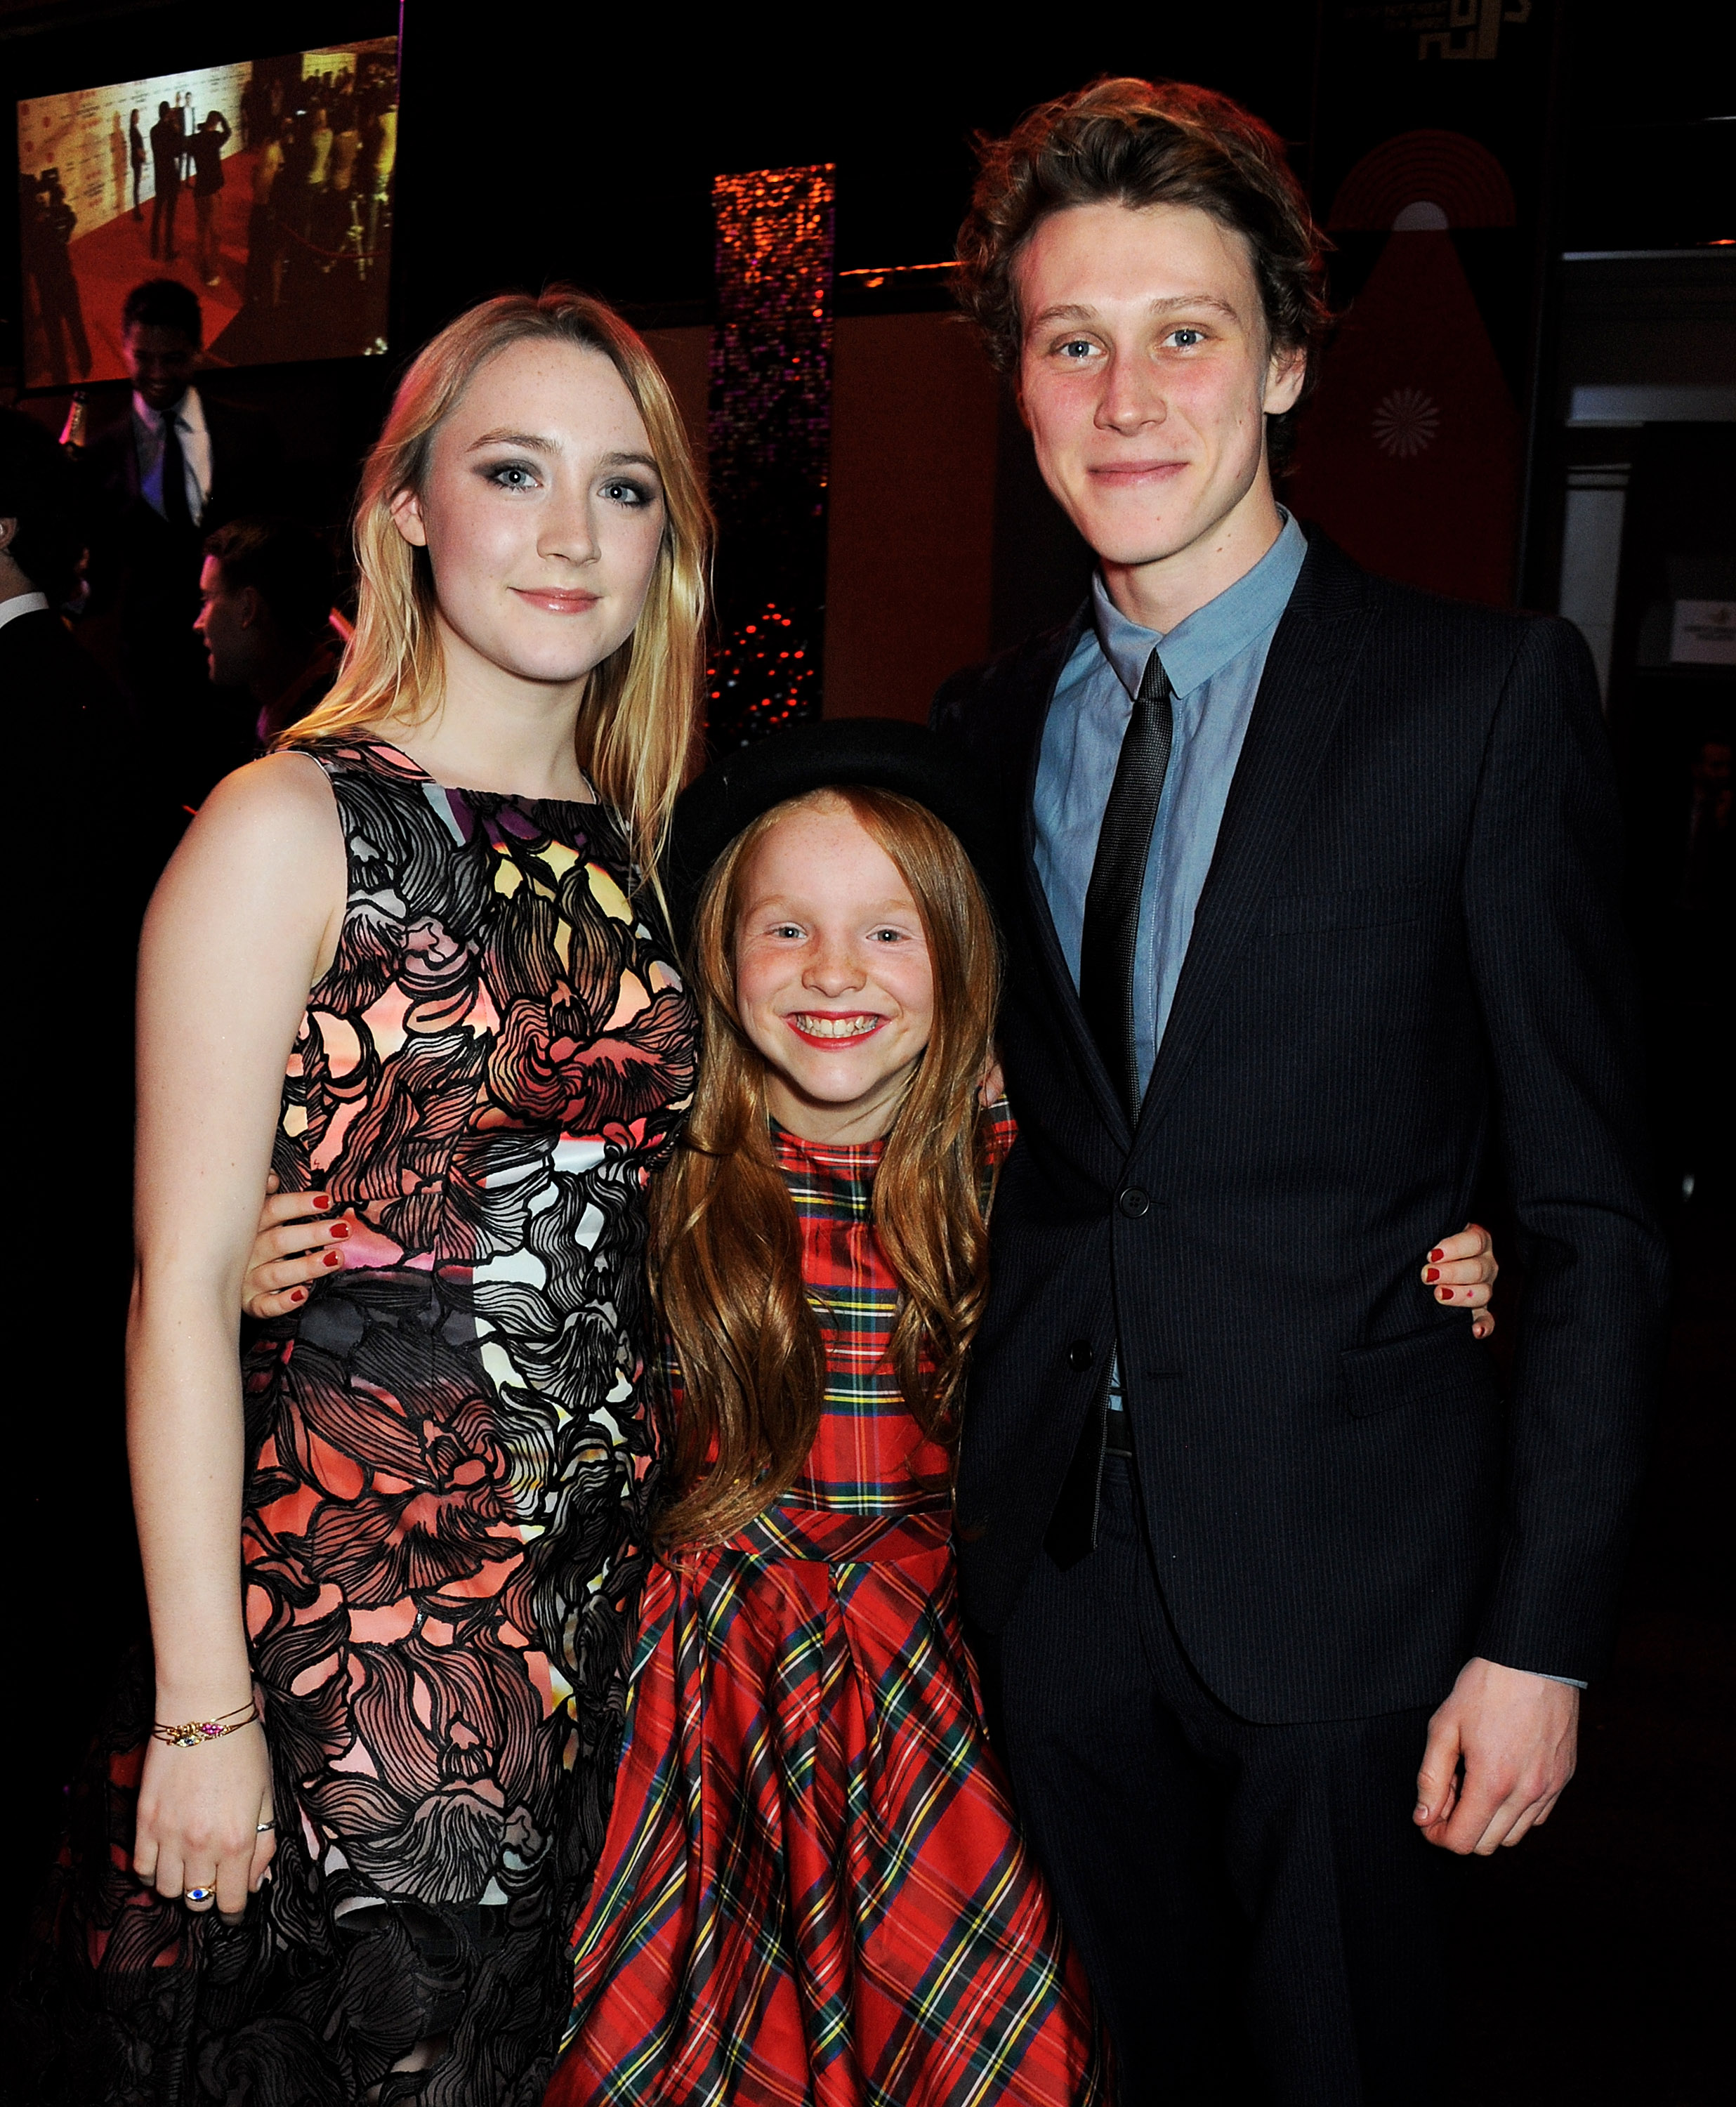 Saoirse Ronan, Harley Bird and George MacKay attend the Moet Reception at the Moet British Independent Film Awards 2013 at Old Billingsgate Market on December 8, 2013, in London, England | Source: Getty Images